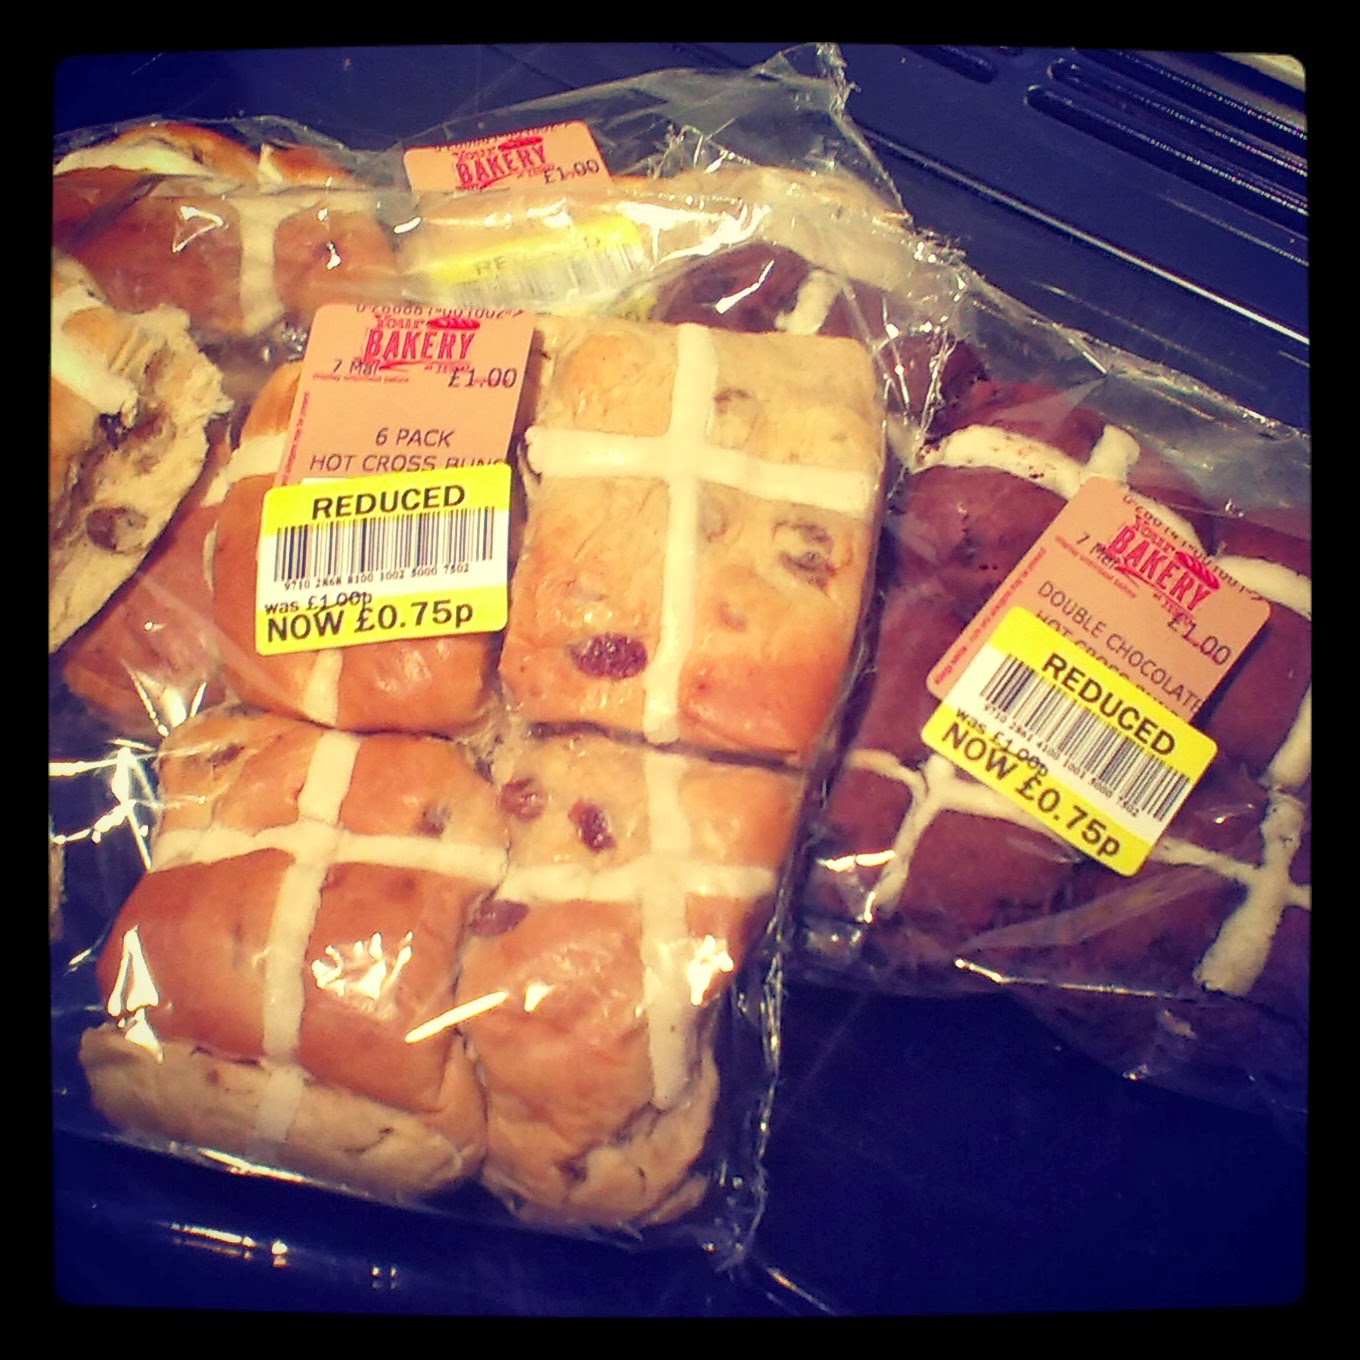 Reduced price hot cross buns